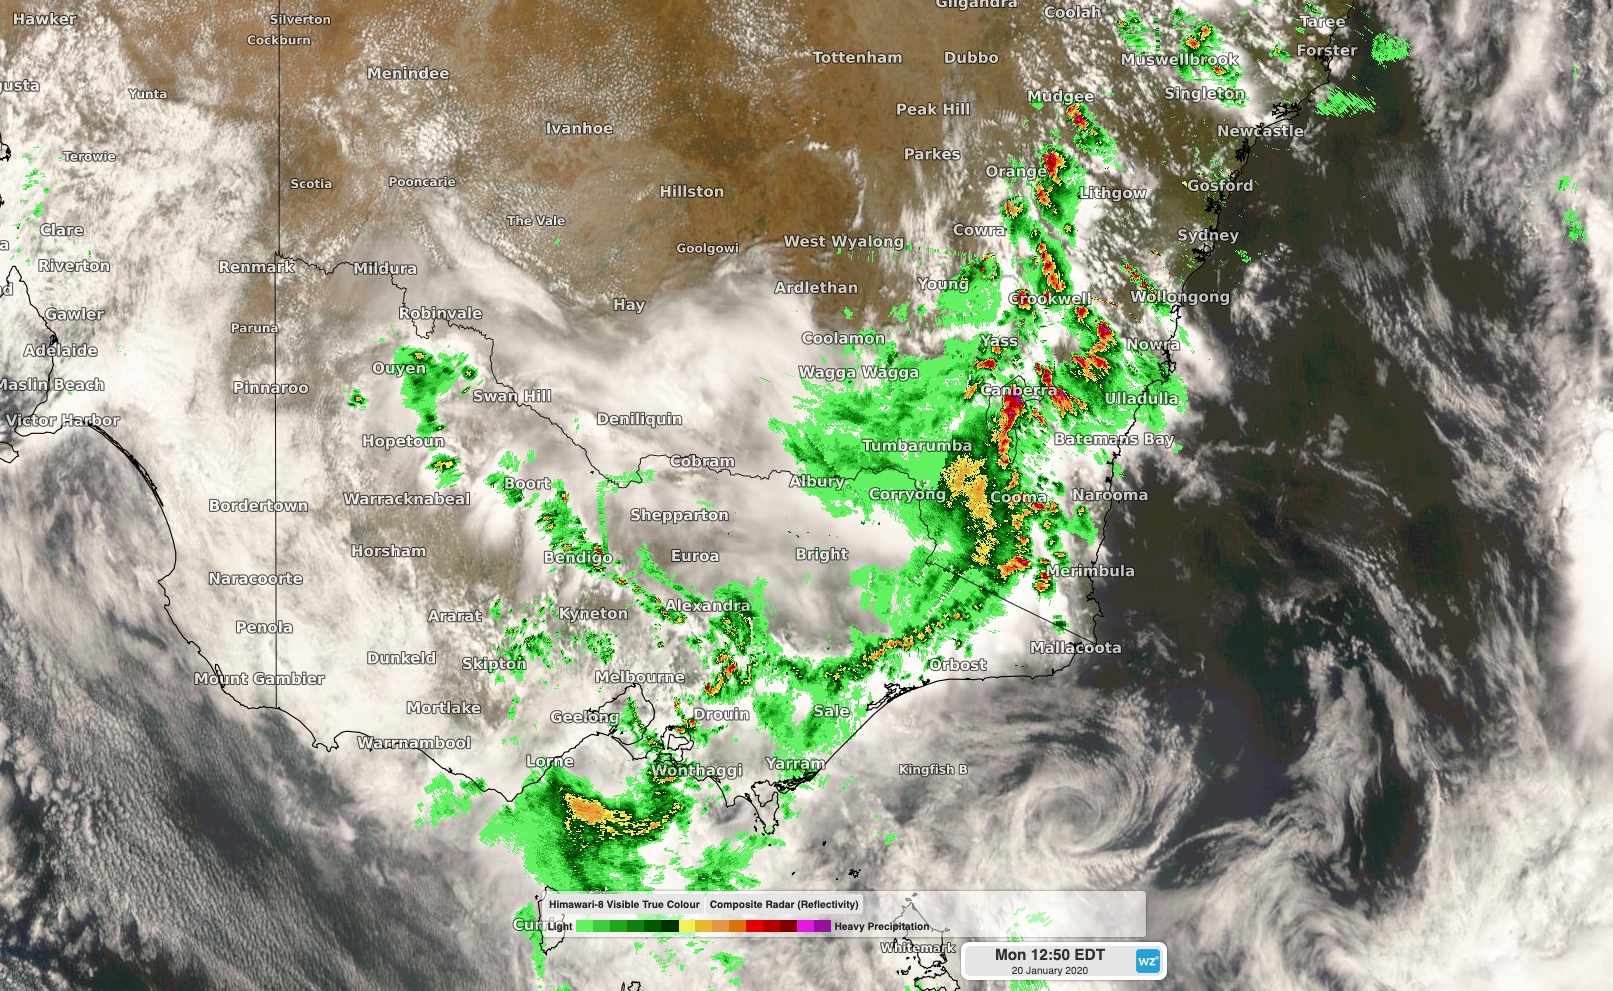 Severe weather hitting NSW, ACT and Victoria